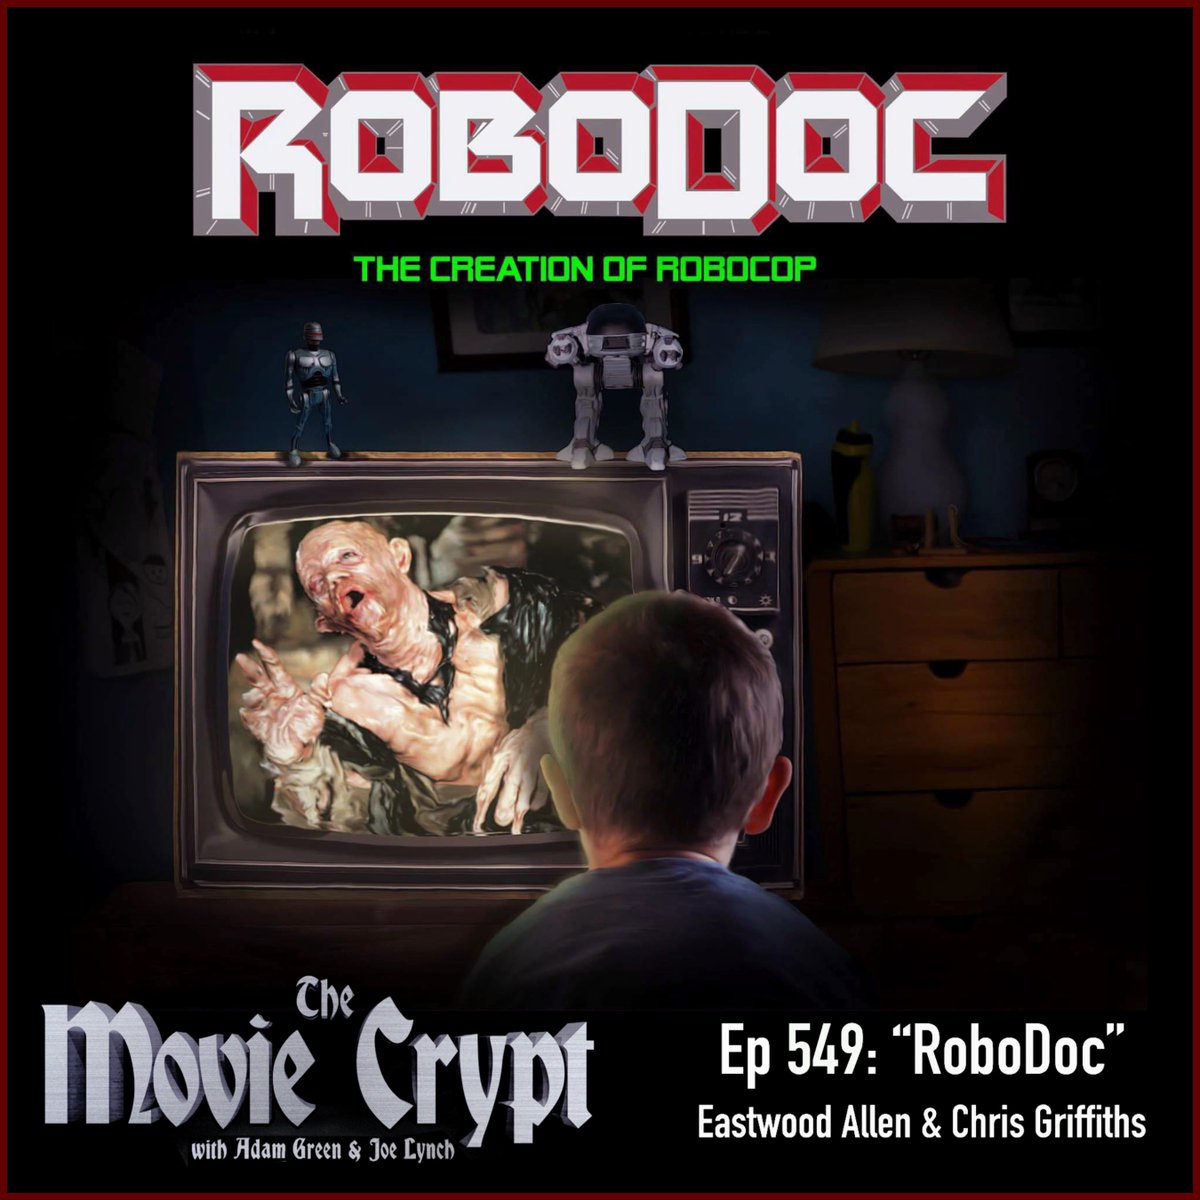 ROBODOC directors discuss shooting the #RoboCop documentary on this week’s The @MovieCrypt Podcast.

“Thank you for your cooperation”
@Adam_Fn_Green & @TheJoeLynch 

LISTEN HERE 🎧
open.spotify.com/episode/68SKg7…